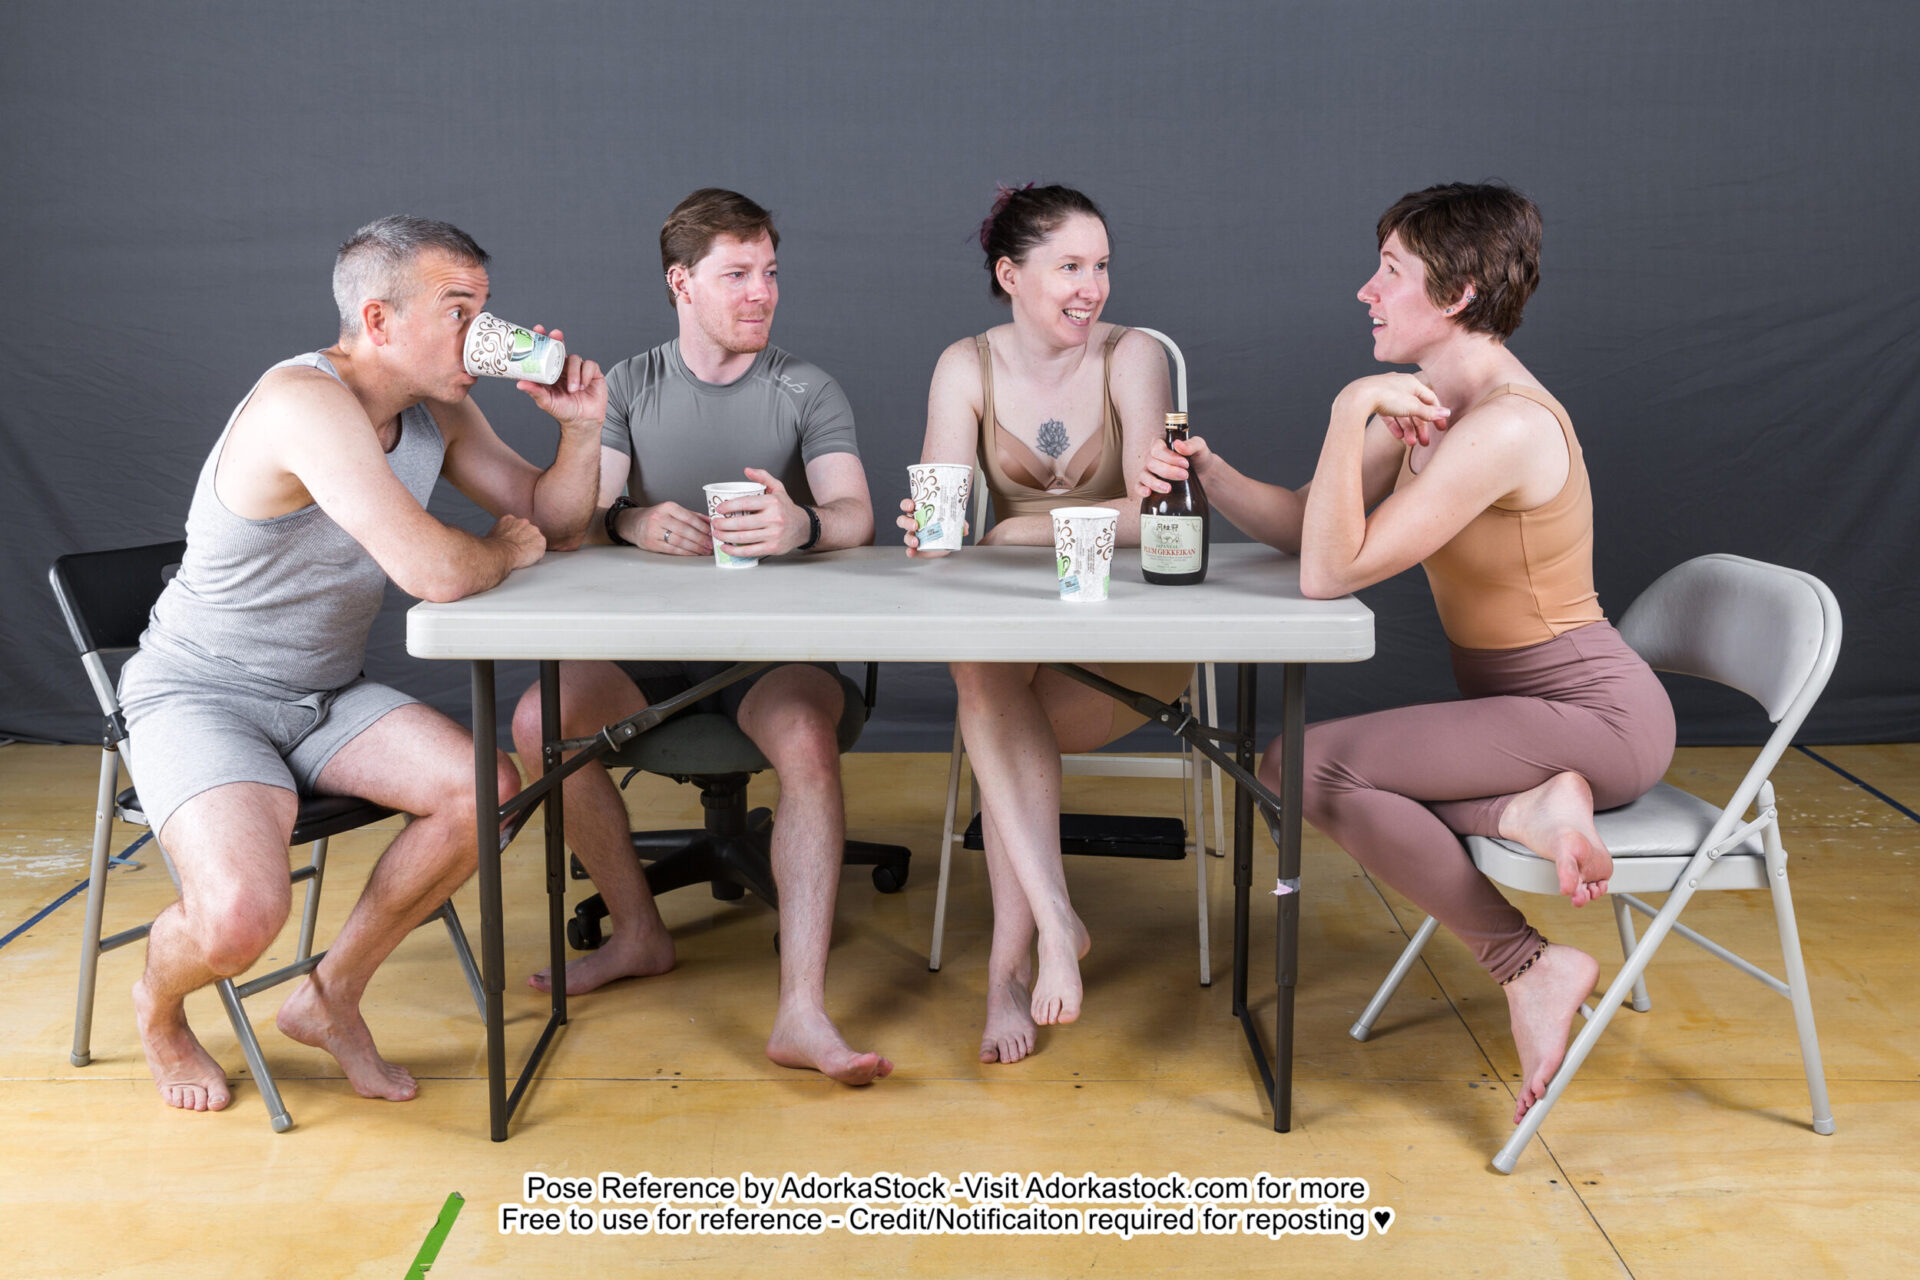 Four pose reference models sitting around a table with some cups having a casual chat, one is sipping.